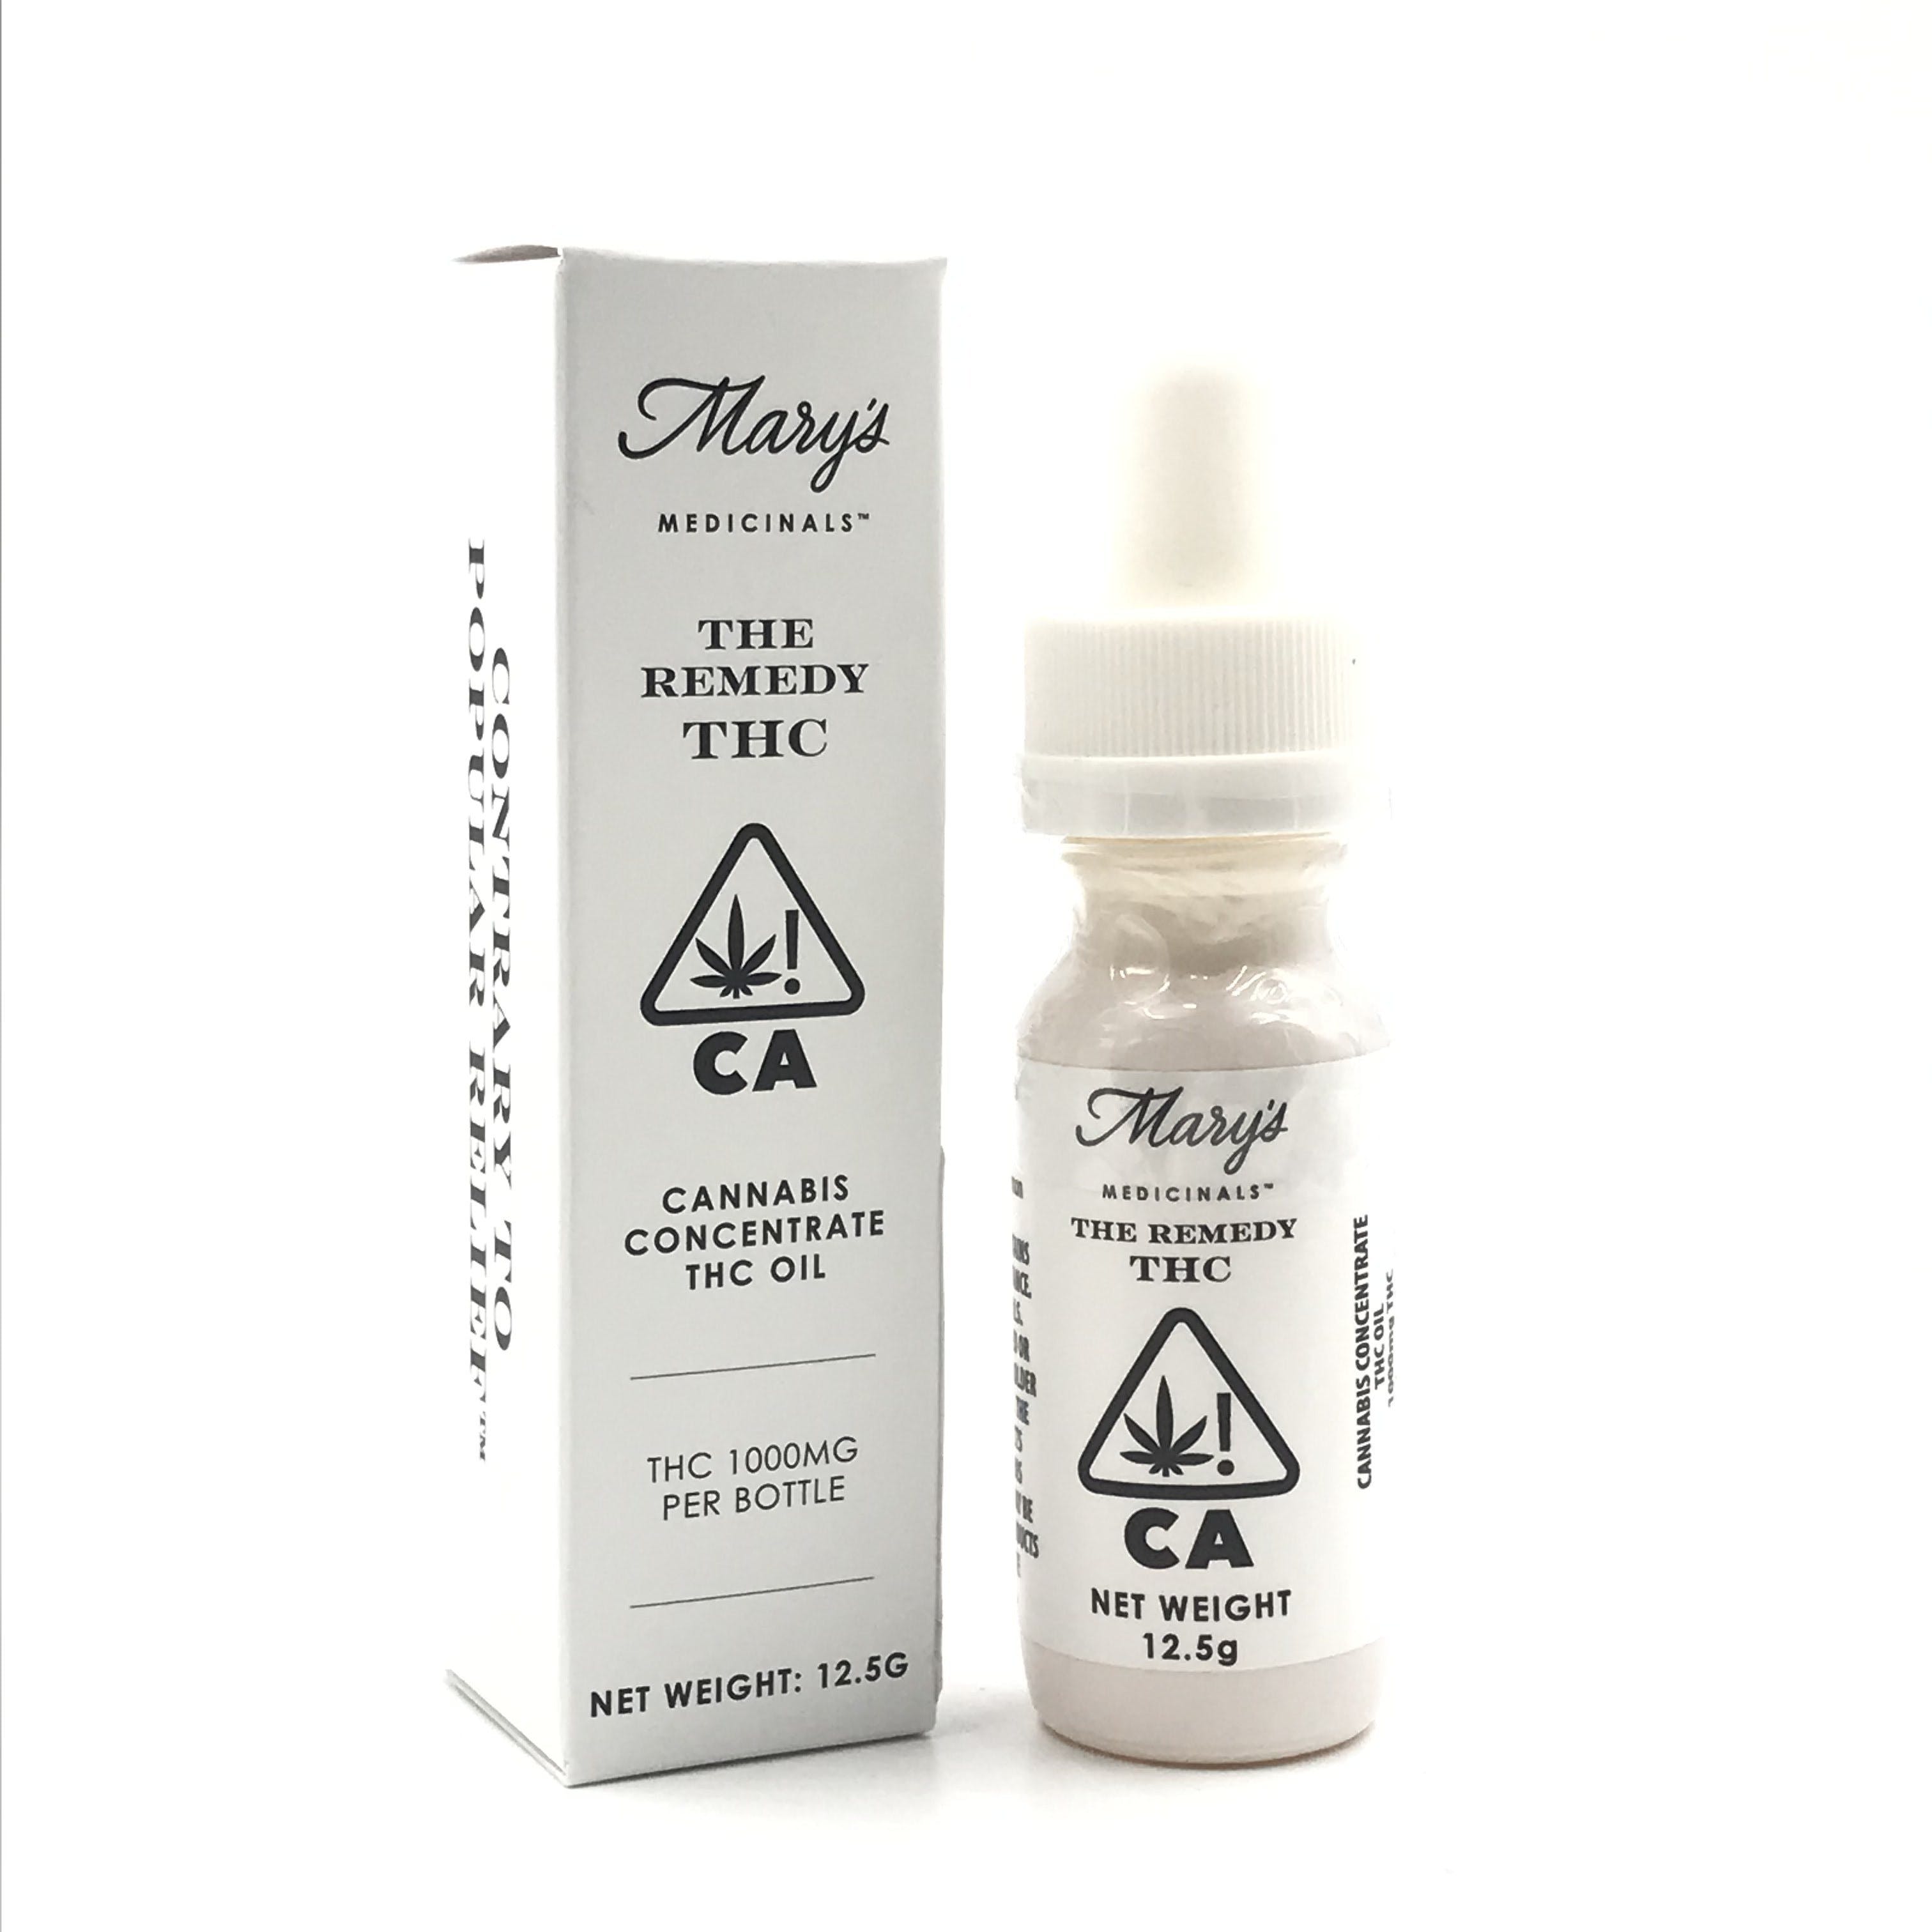 [Drops] 1000mgTHC The Remedy - Mary's Medicinal